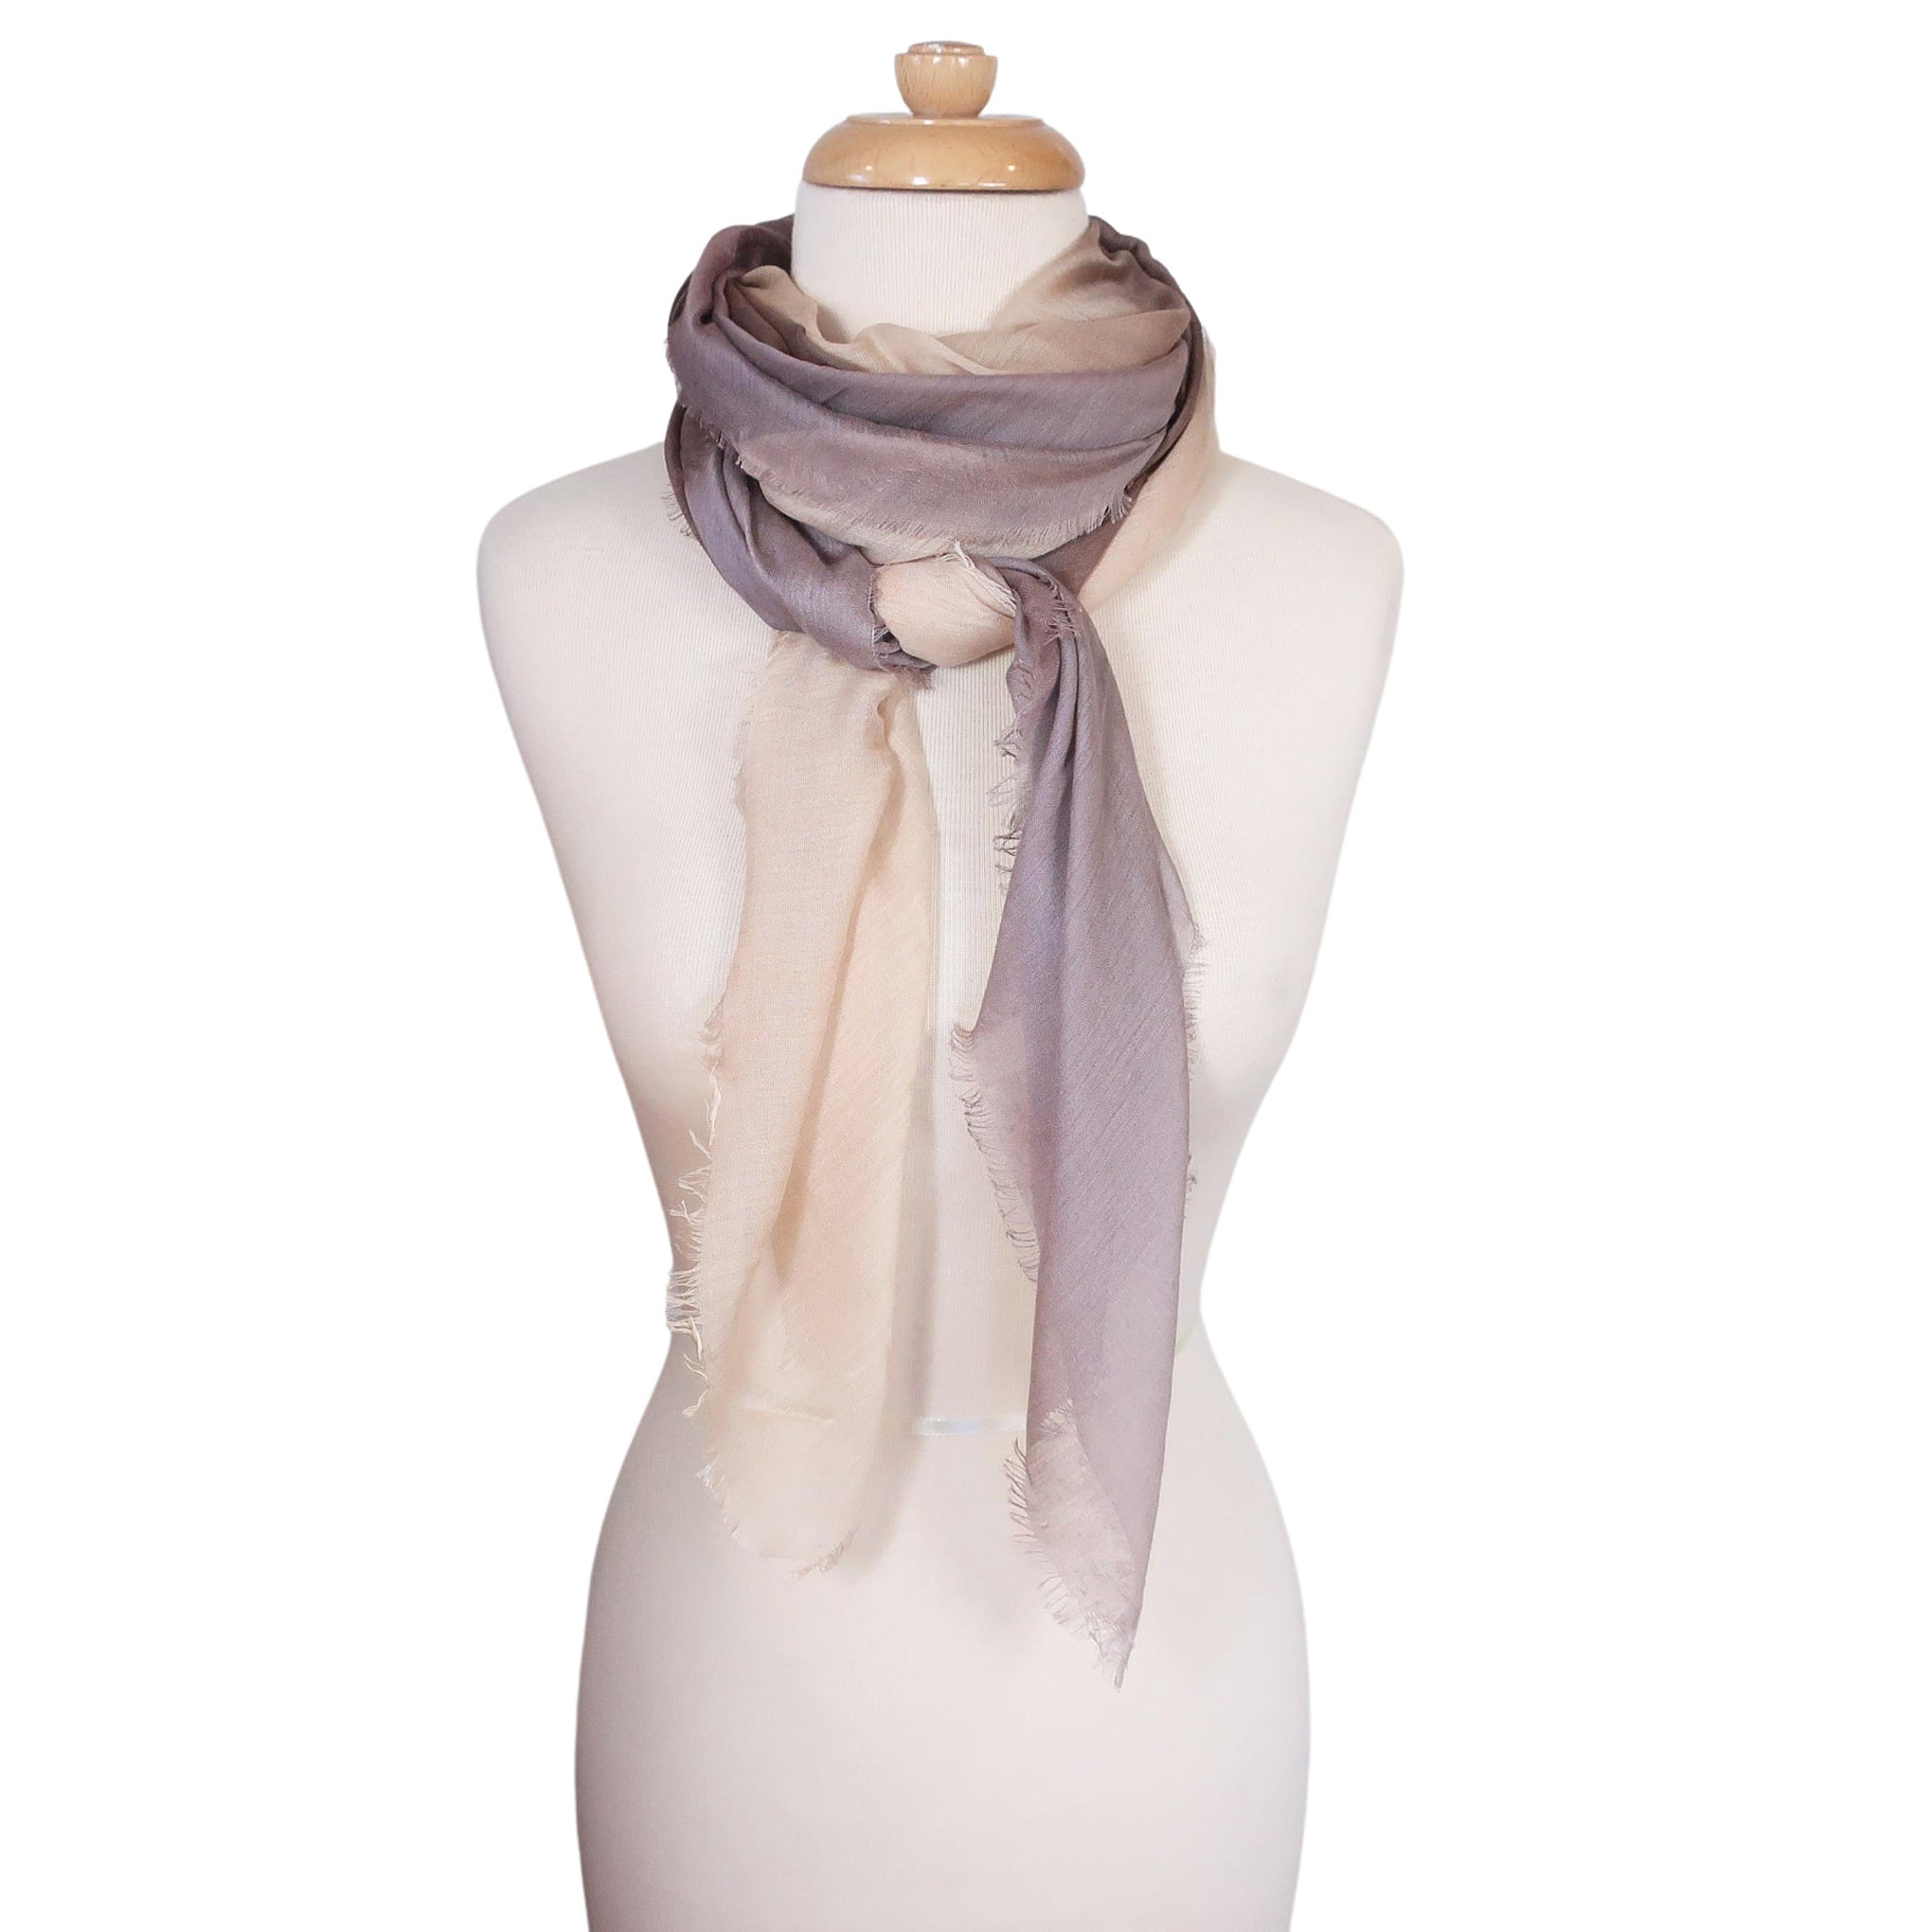 Blue Pacific Dream Cashmere and Silk Scarf in Tan and Taupe 47 x 37